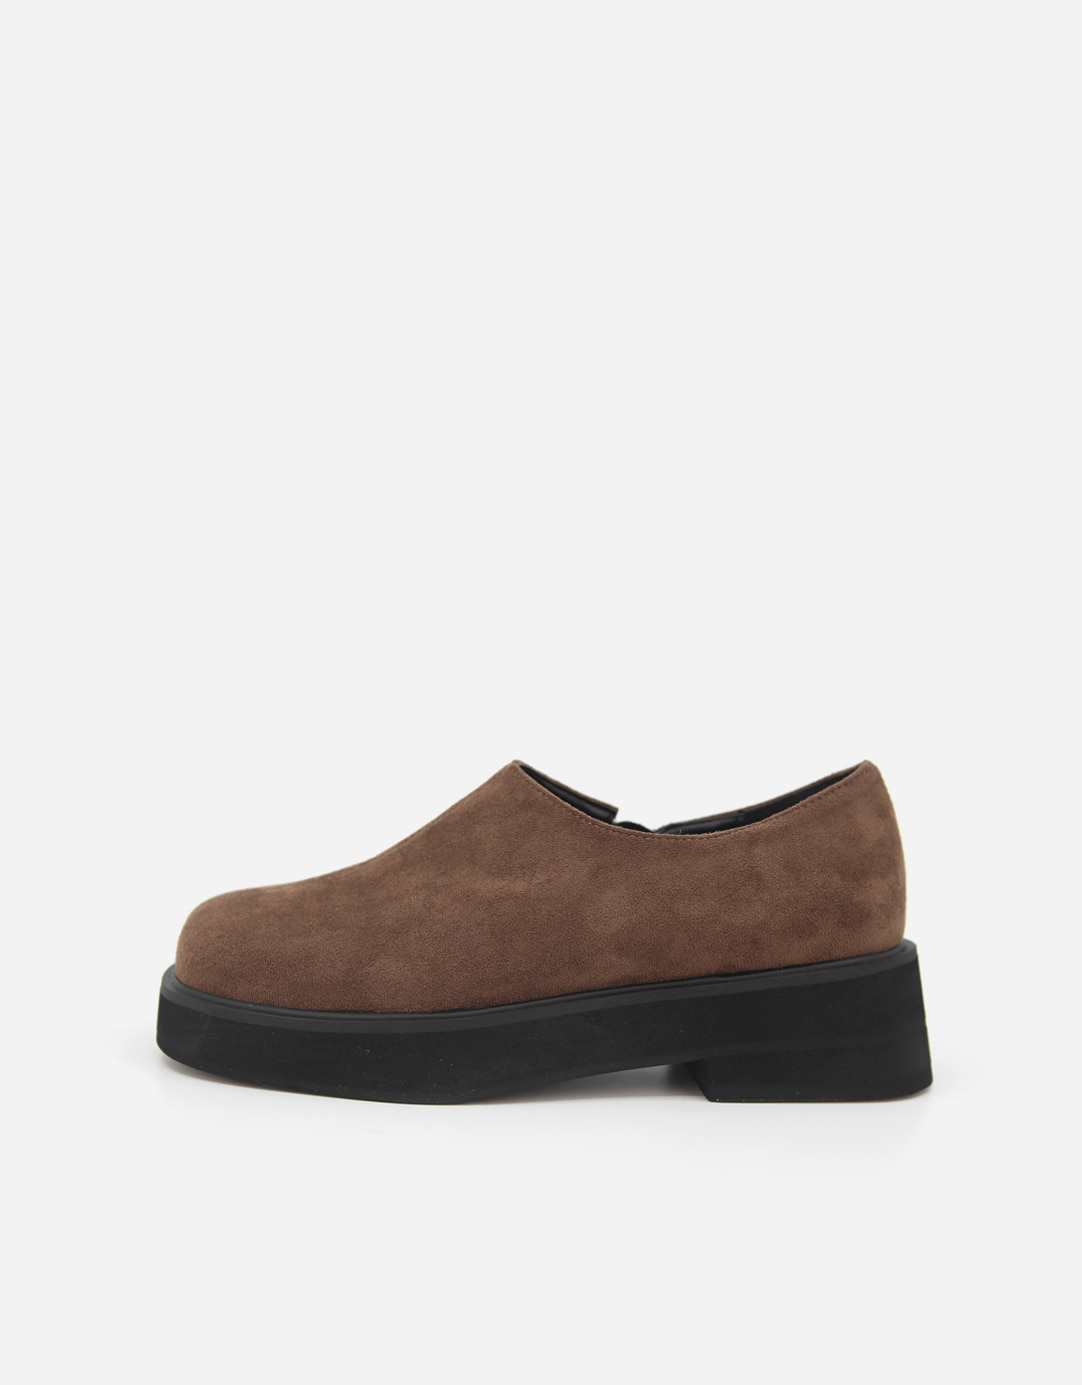 CHUNKY ROUND SUEDE LOAFER